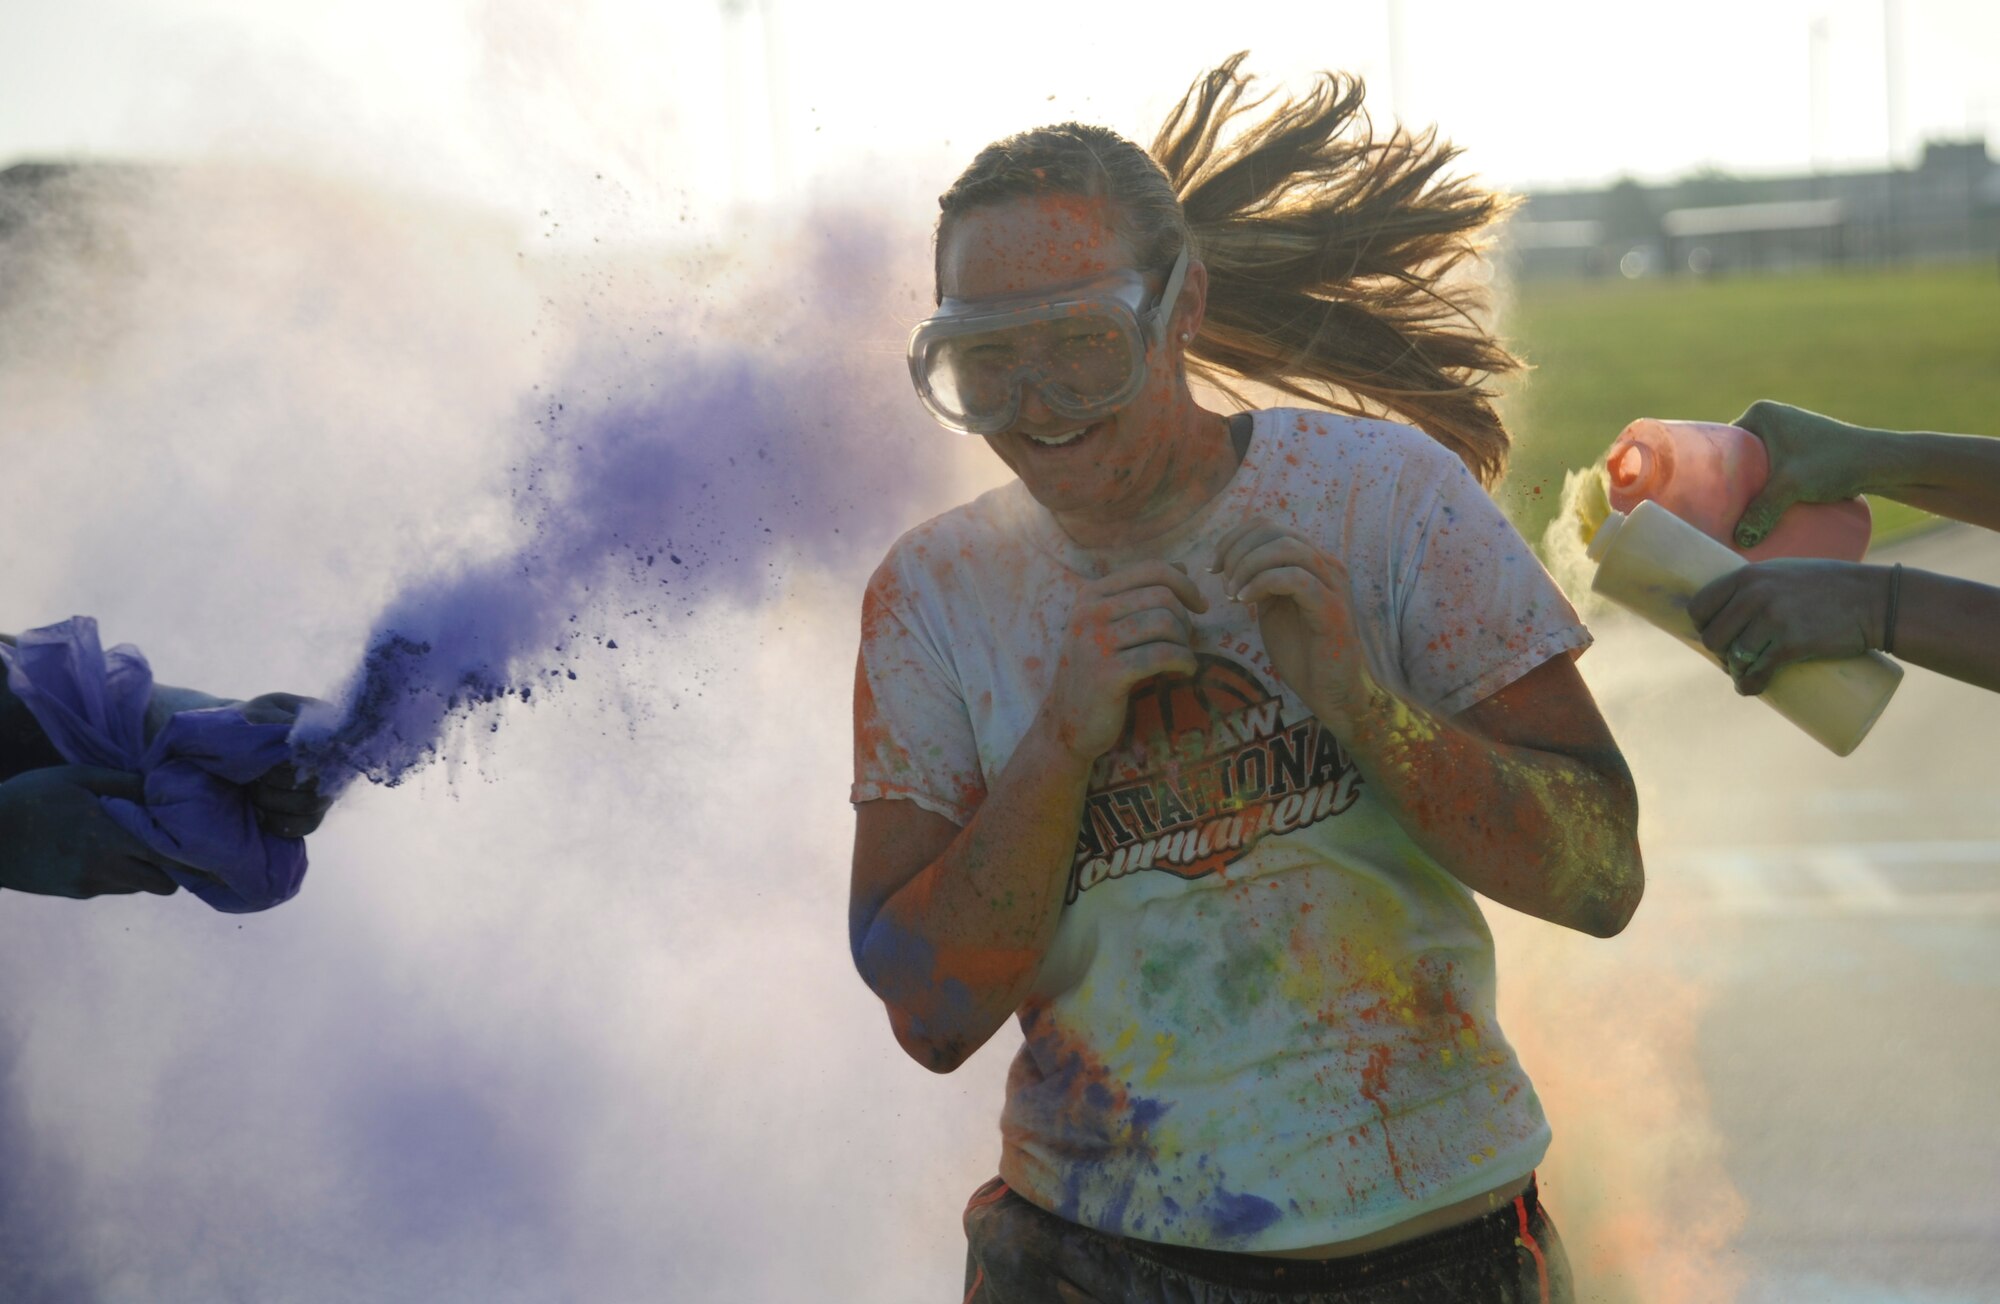 A participant runs as volunteers throw colored powder on her during the Lesbian, Gay, Bisexual and Transgender (LGBT) Pride Month Rainbow Run 5K at Whiteman Air Force Base, Mo., June 24, 2016. The run promoted the 2016 theme of “celebration.” (U.S. Air Force photo by Senior Airman Danielle Quilla)